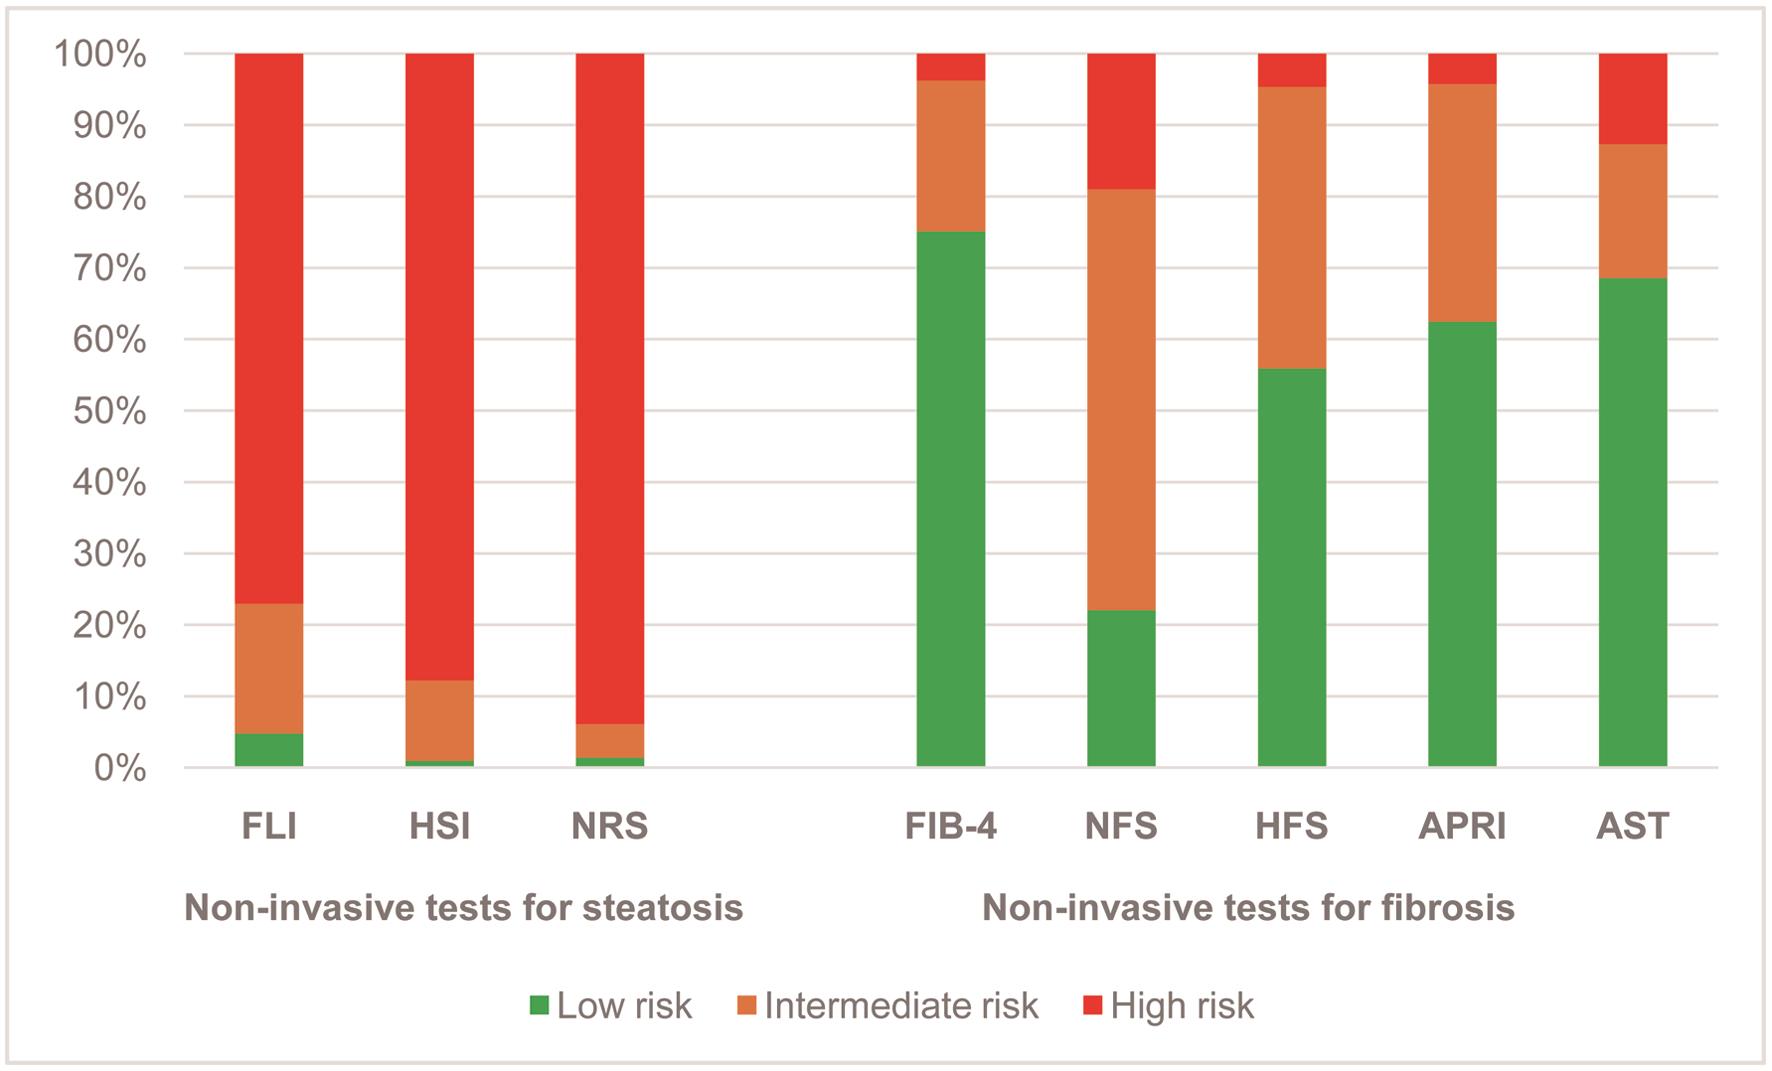 Risk stratification for steatosis and fibrosis in type 2 diabetes mellitus patients based on various noninvasive tests.